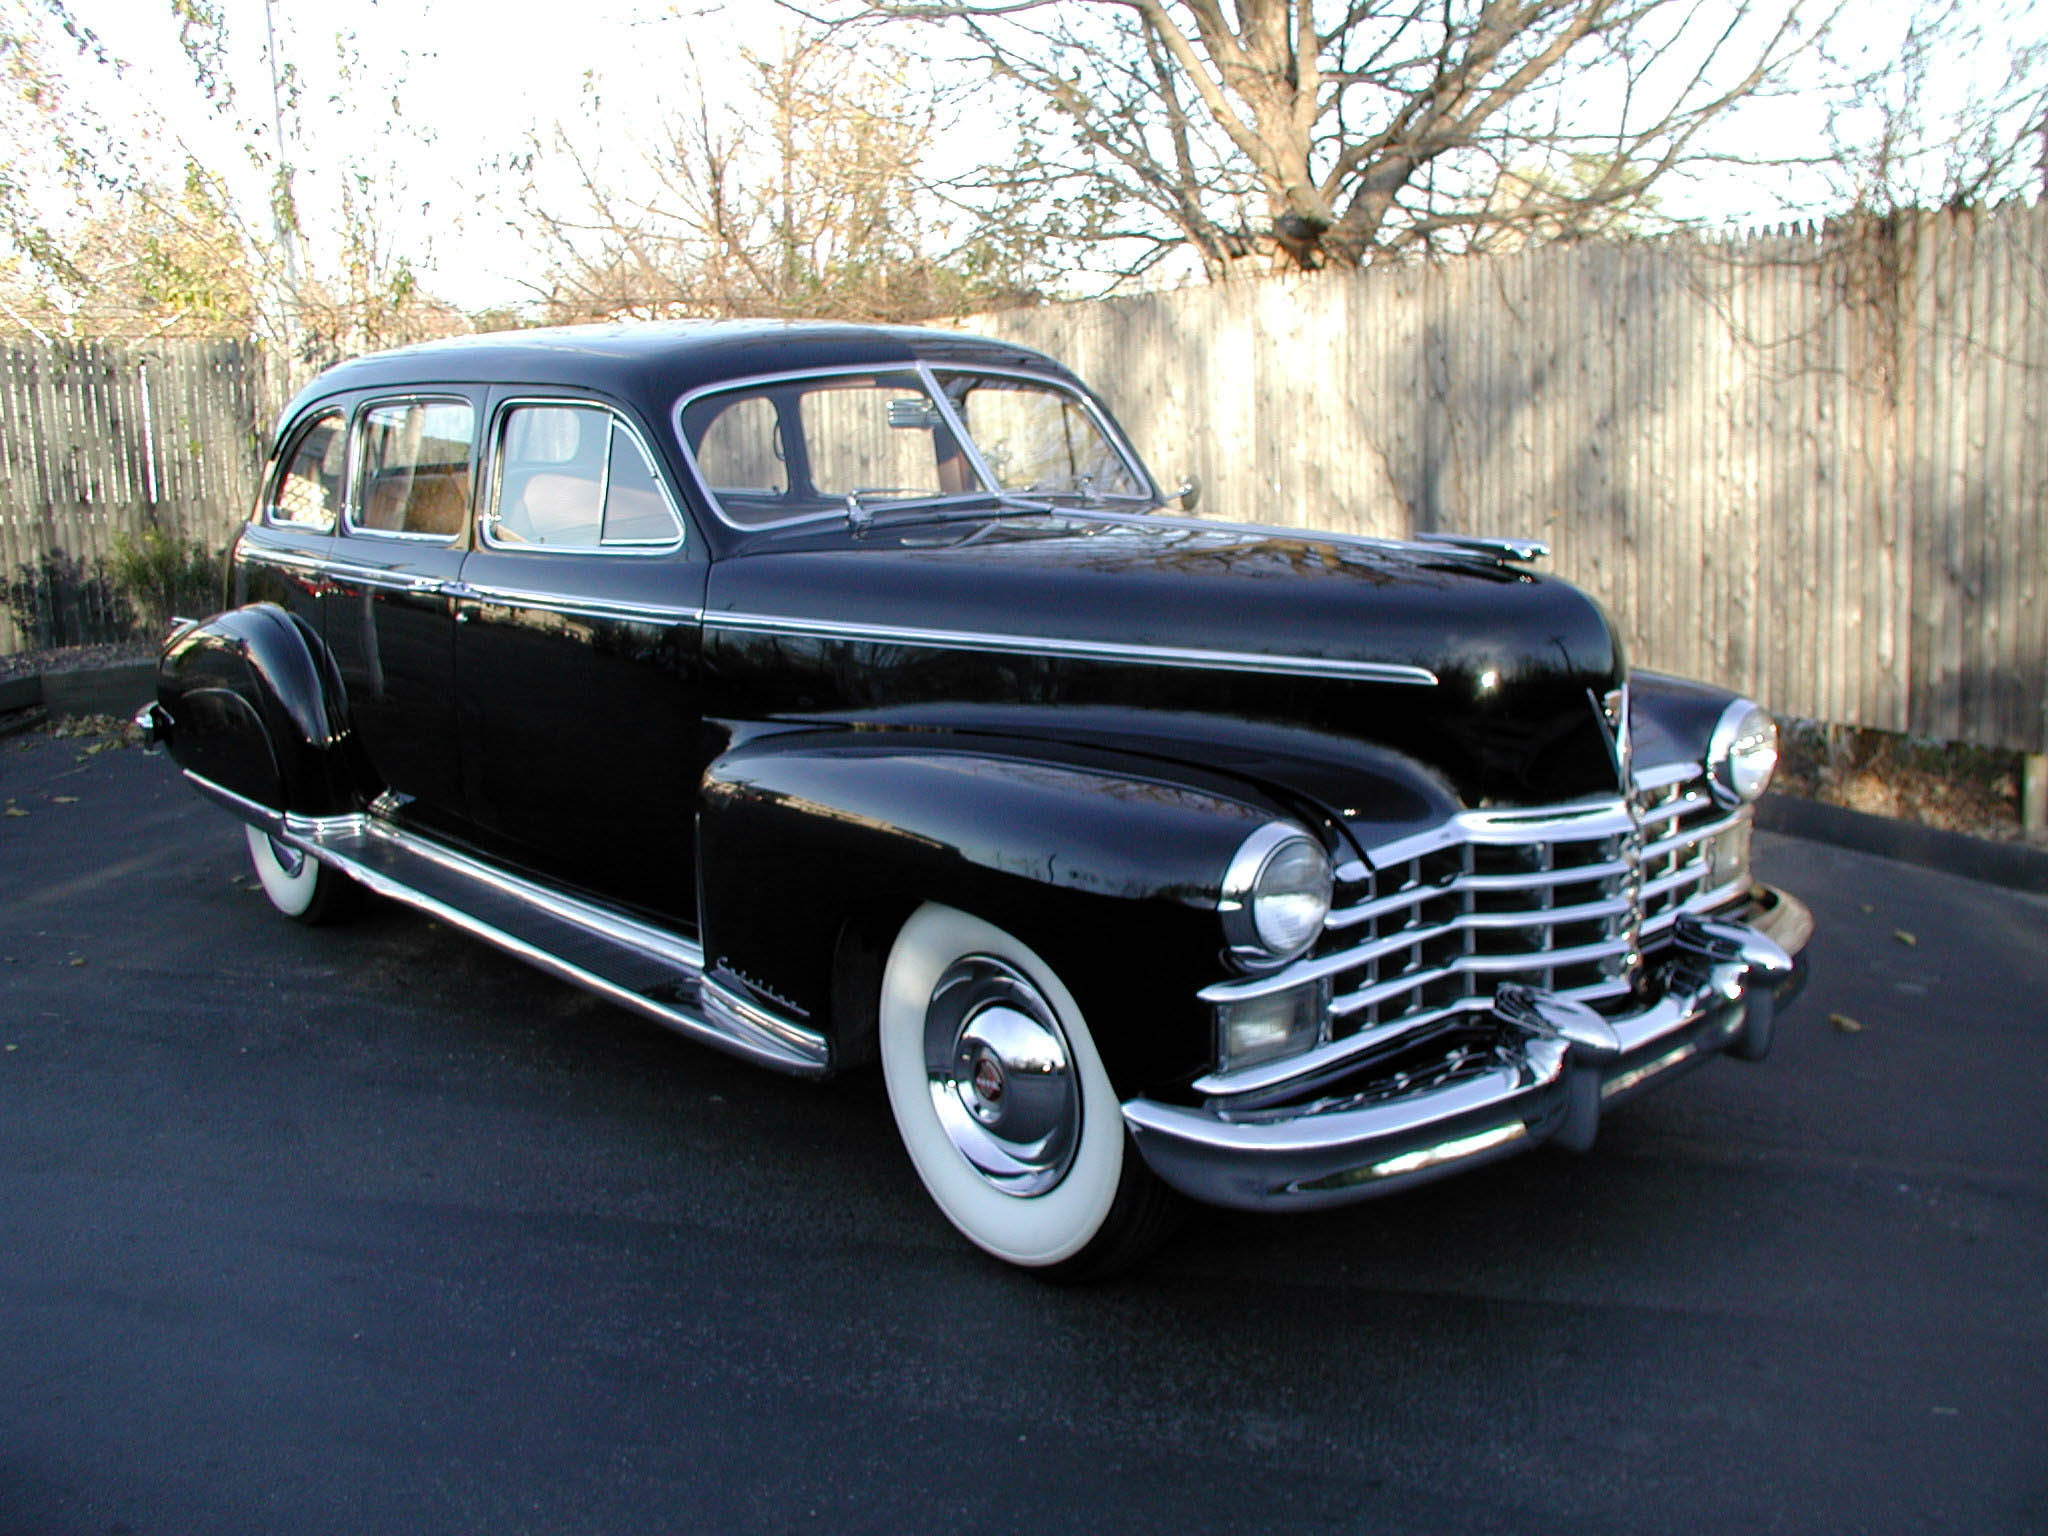 1947 cadillac fleetwood series 75 imperial